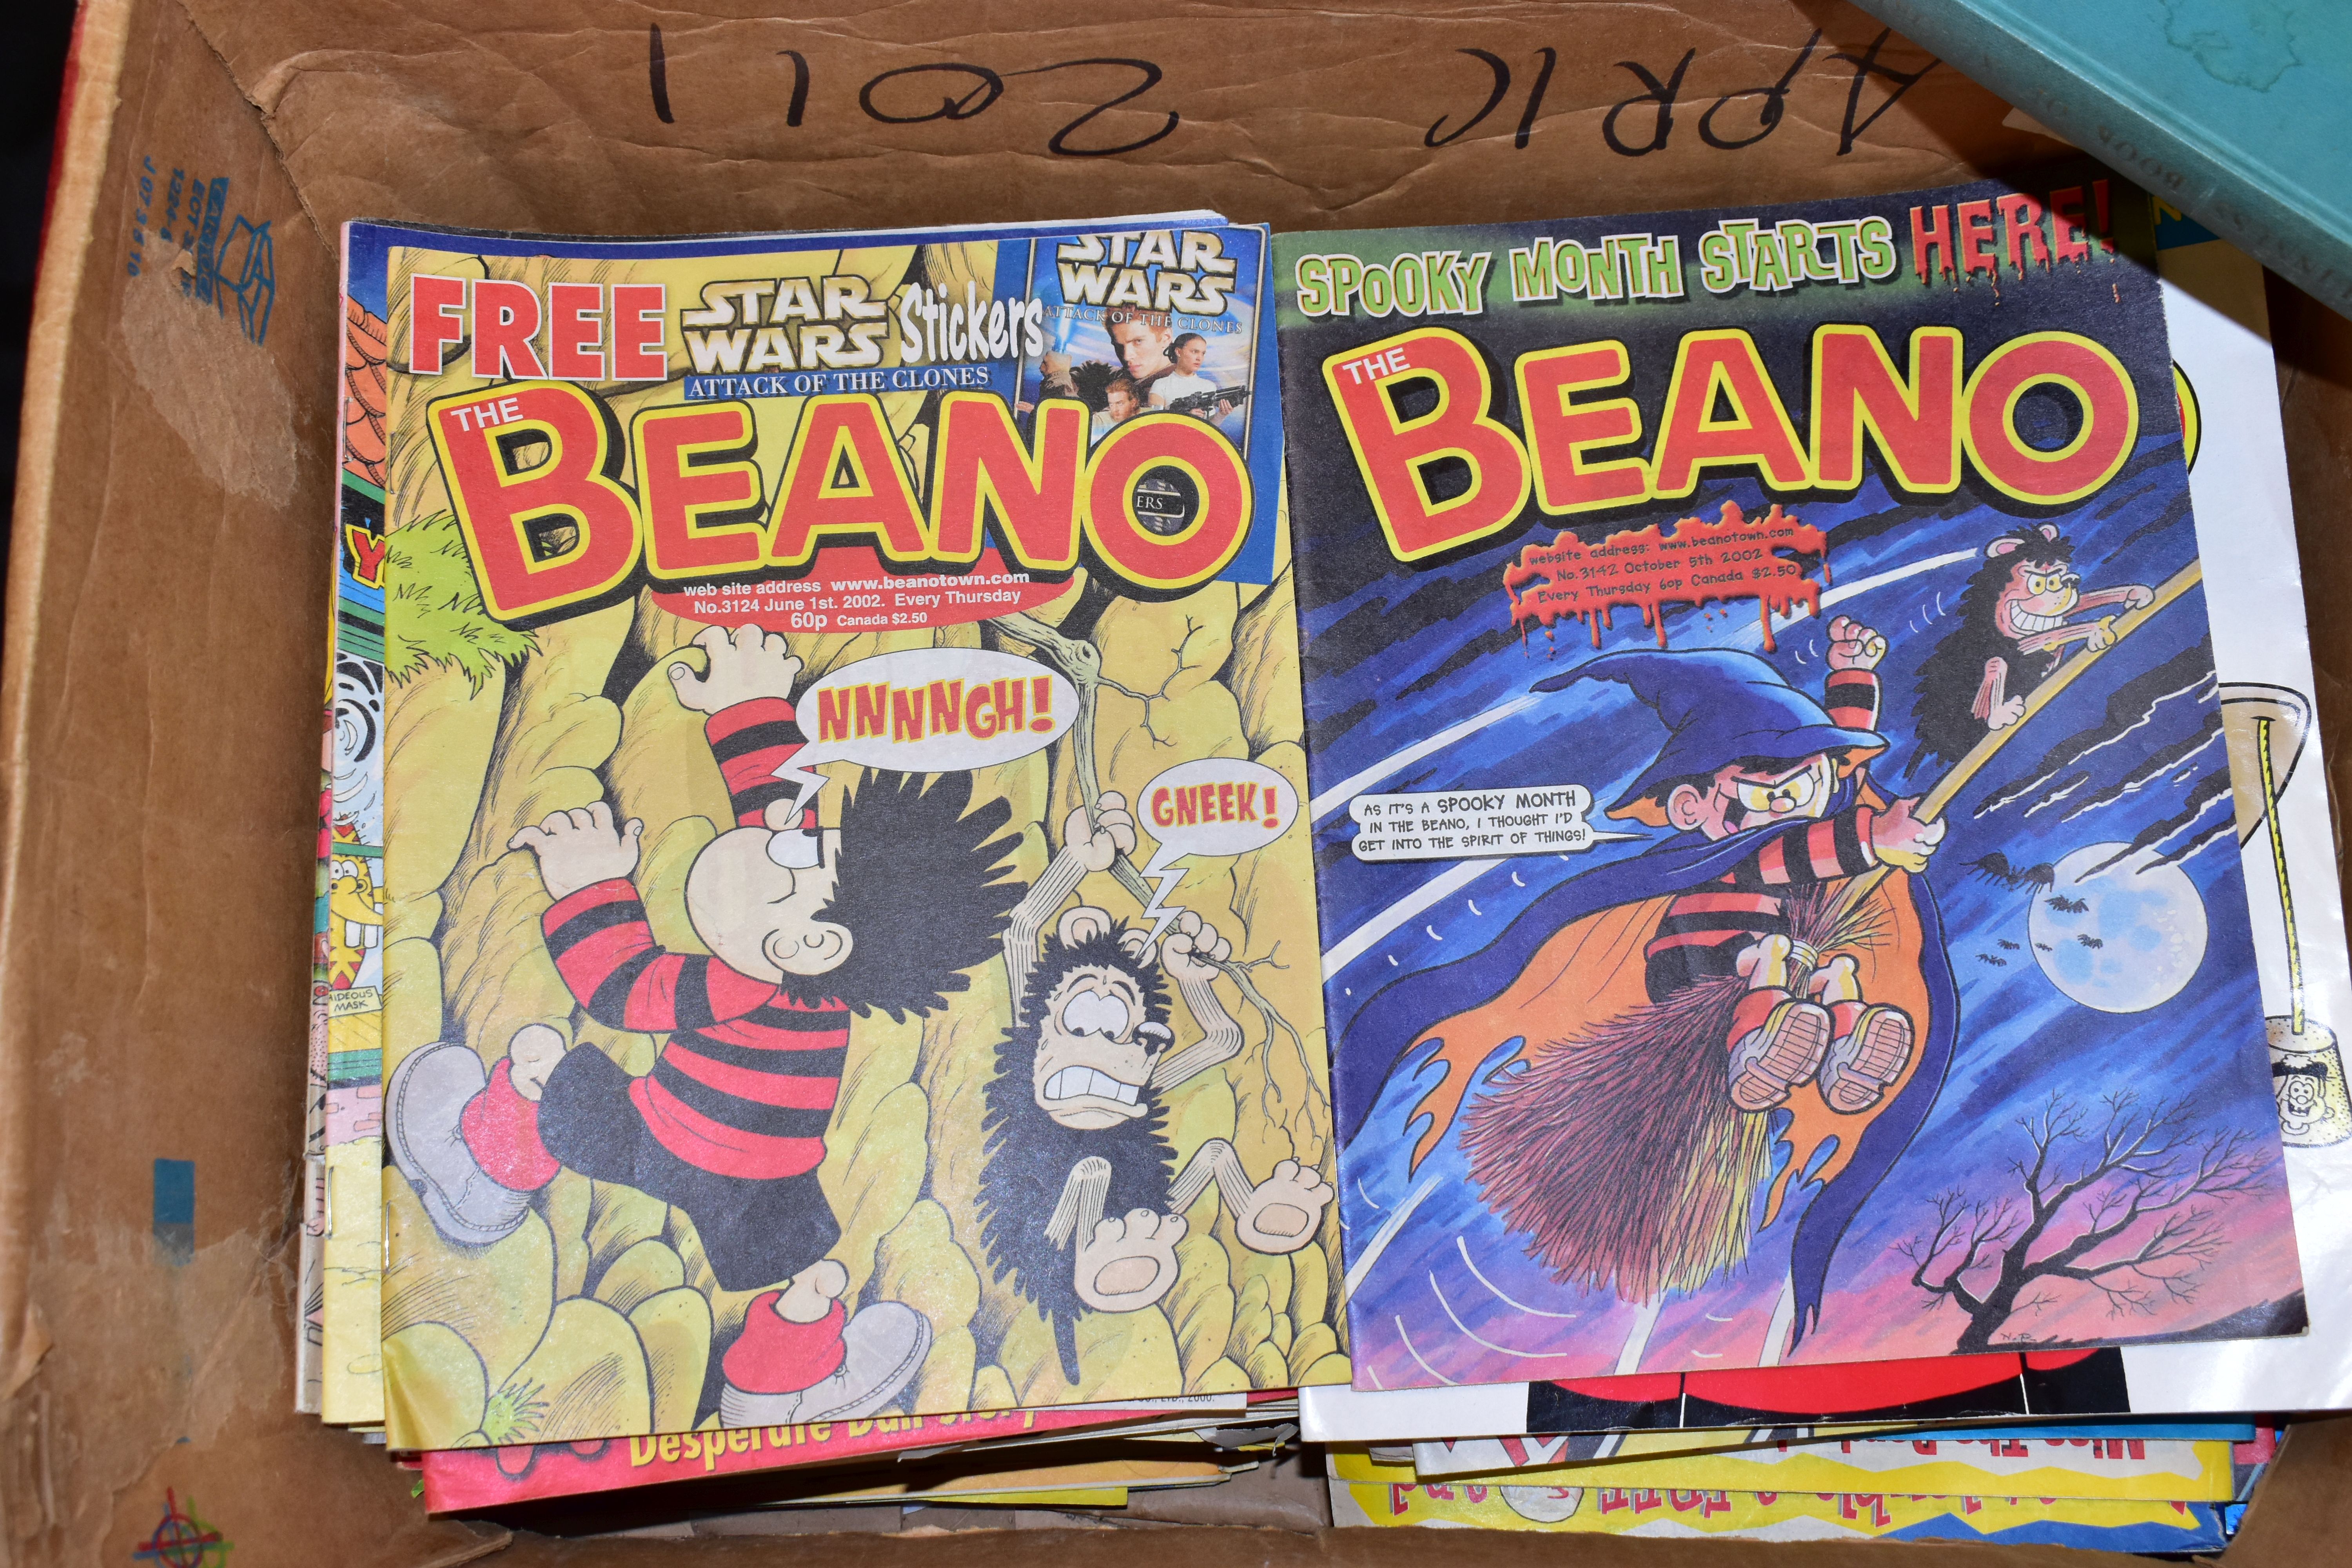 BOOKS & COMICS, approximately forty book titles to include VIZ, Beano, Dandy, Bunty, Annual, - Image 4 of 4